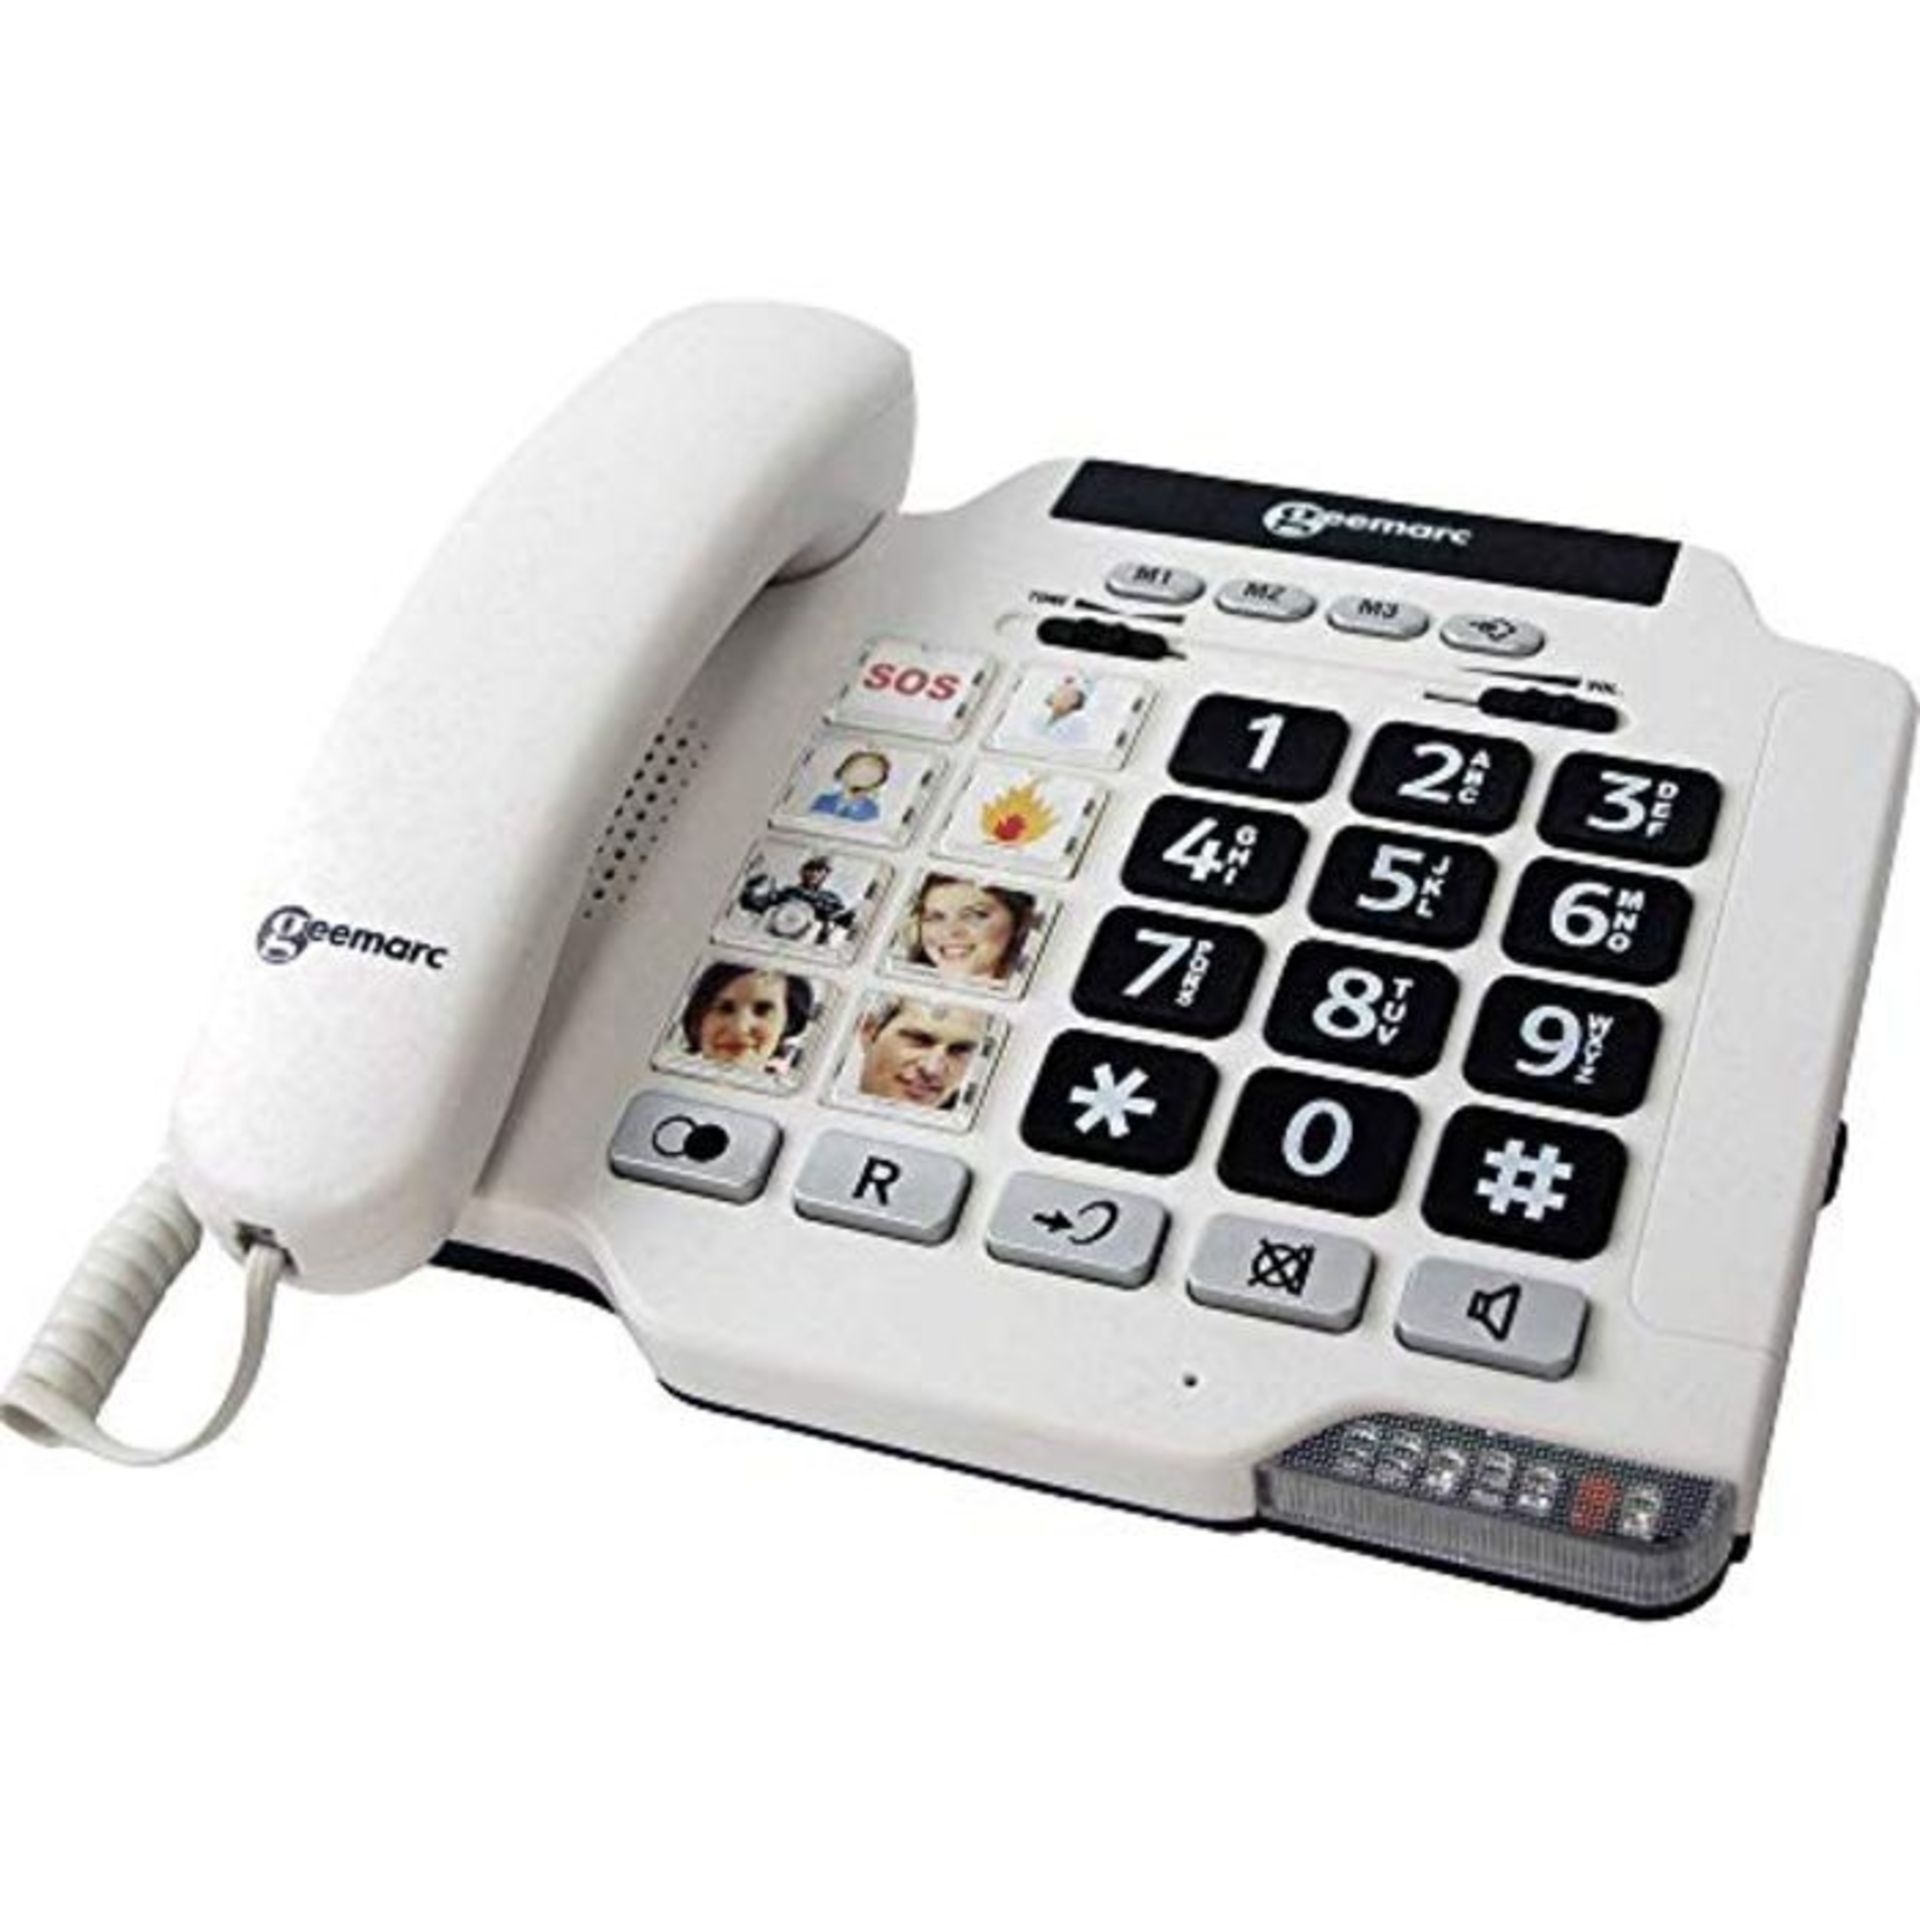 Geemarc PHTOTPHONE 100 corded seniors phone photo buttons white